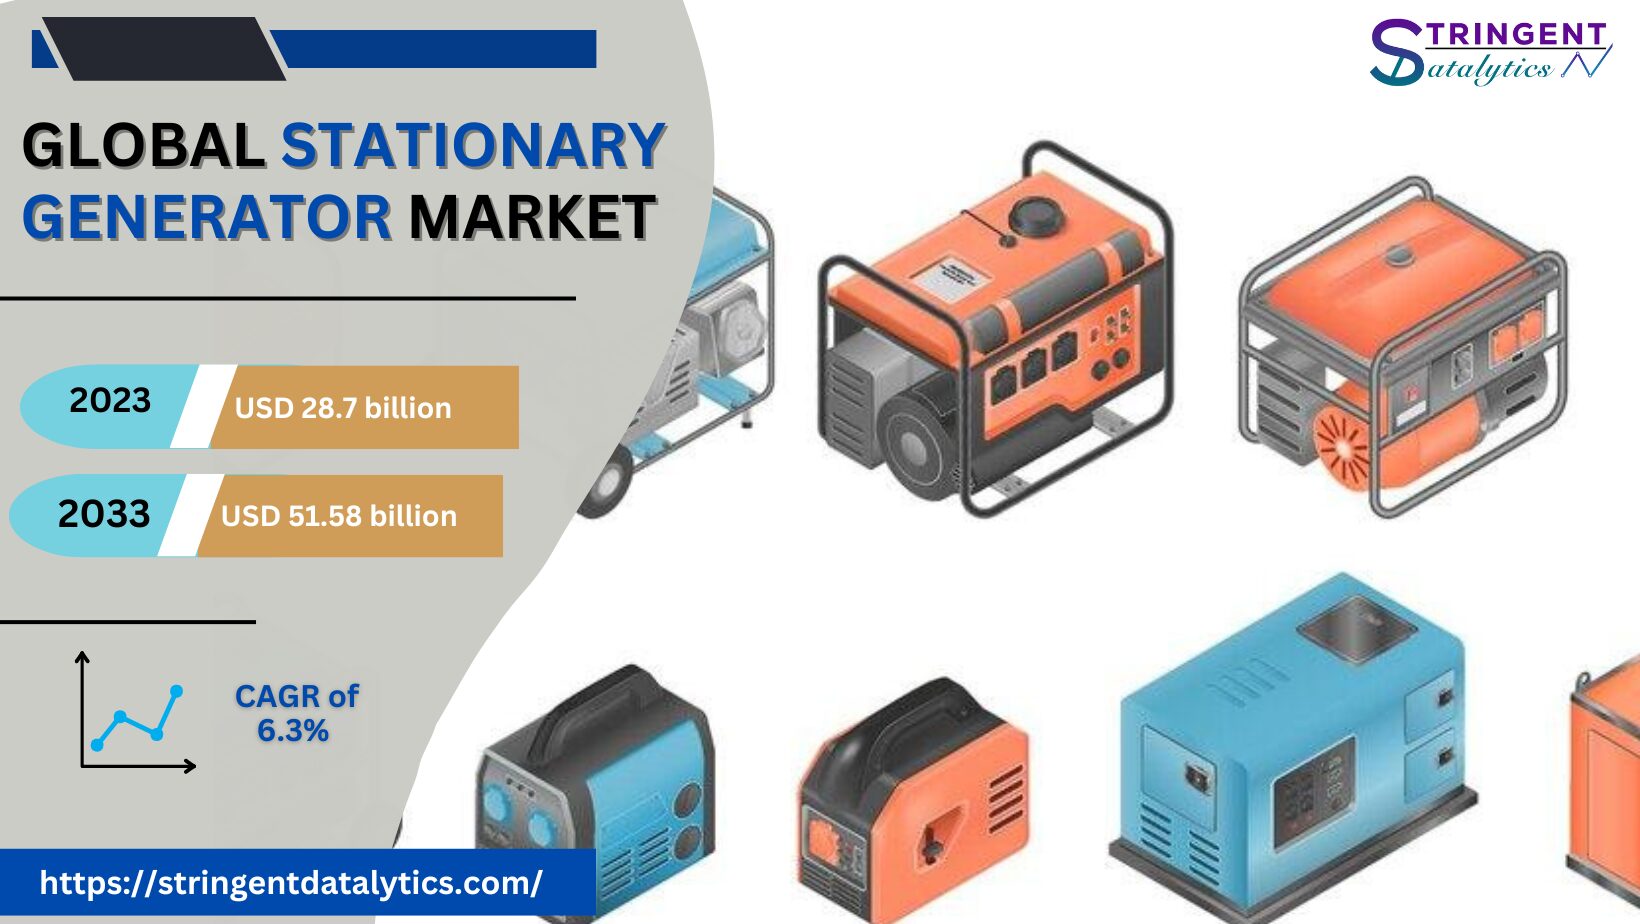 Stationary Generator Market Overview Analysis, Trends, Share, Size, Type & Future Forecast to 2033